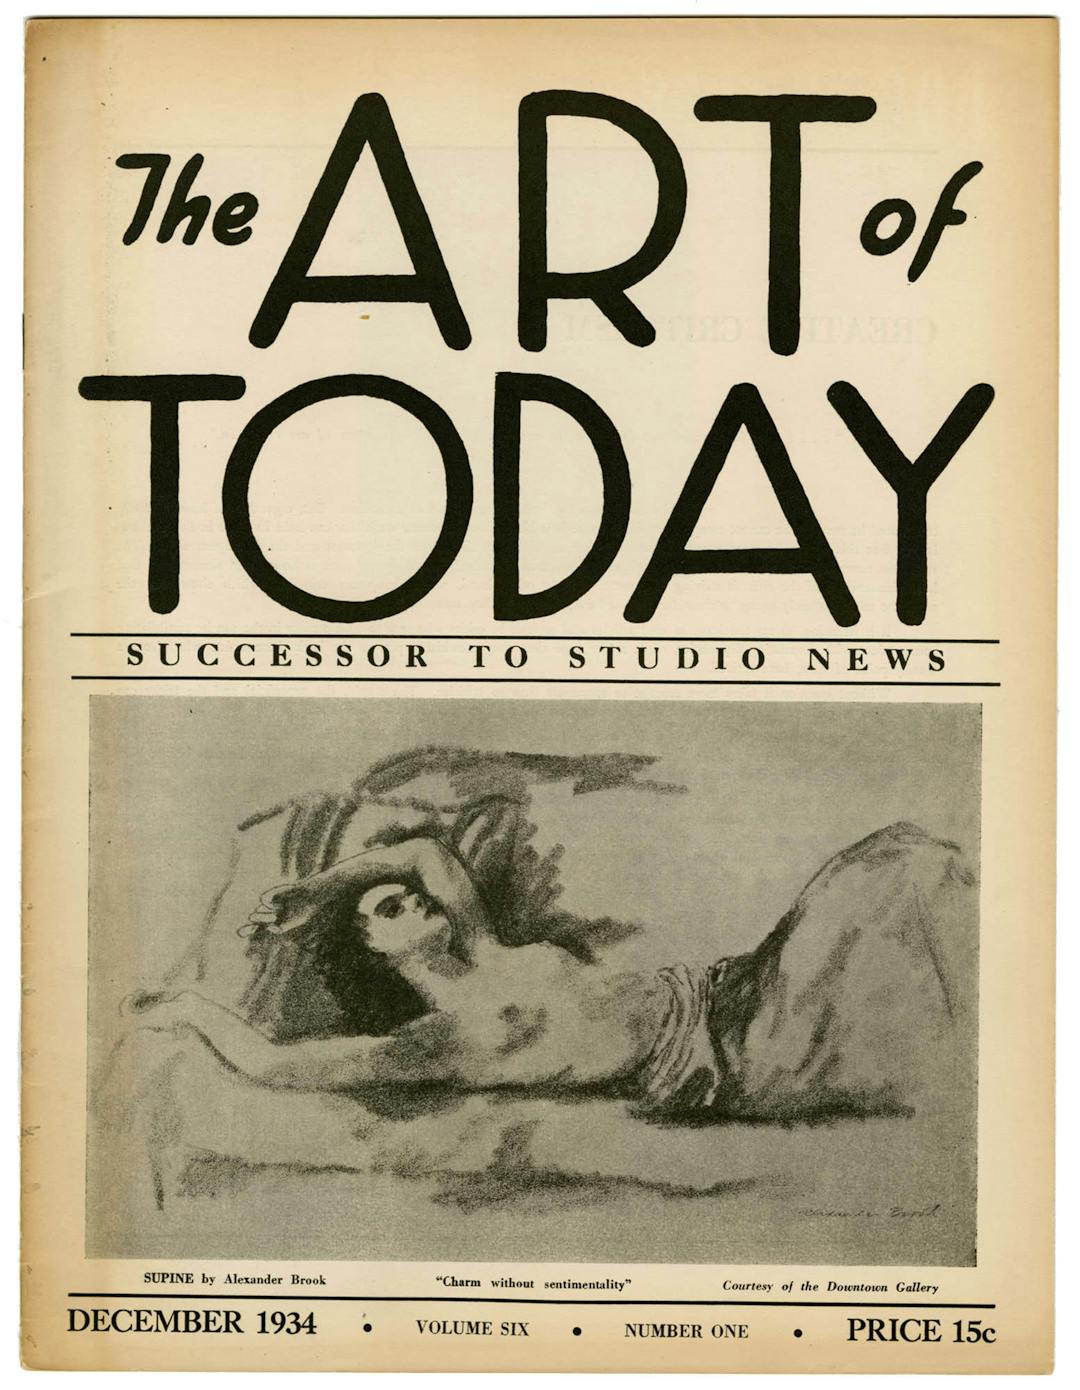 The Art of Today, Vol 6, no. 1, December 1934 – The Richard Pousette-Dart Foundation